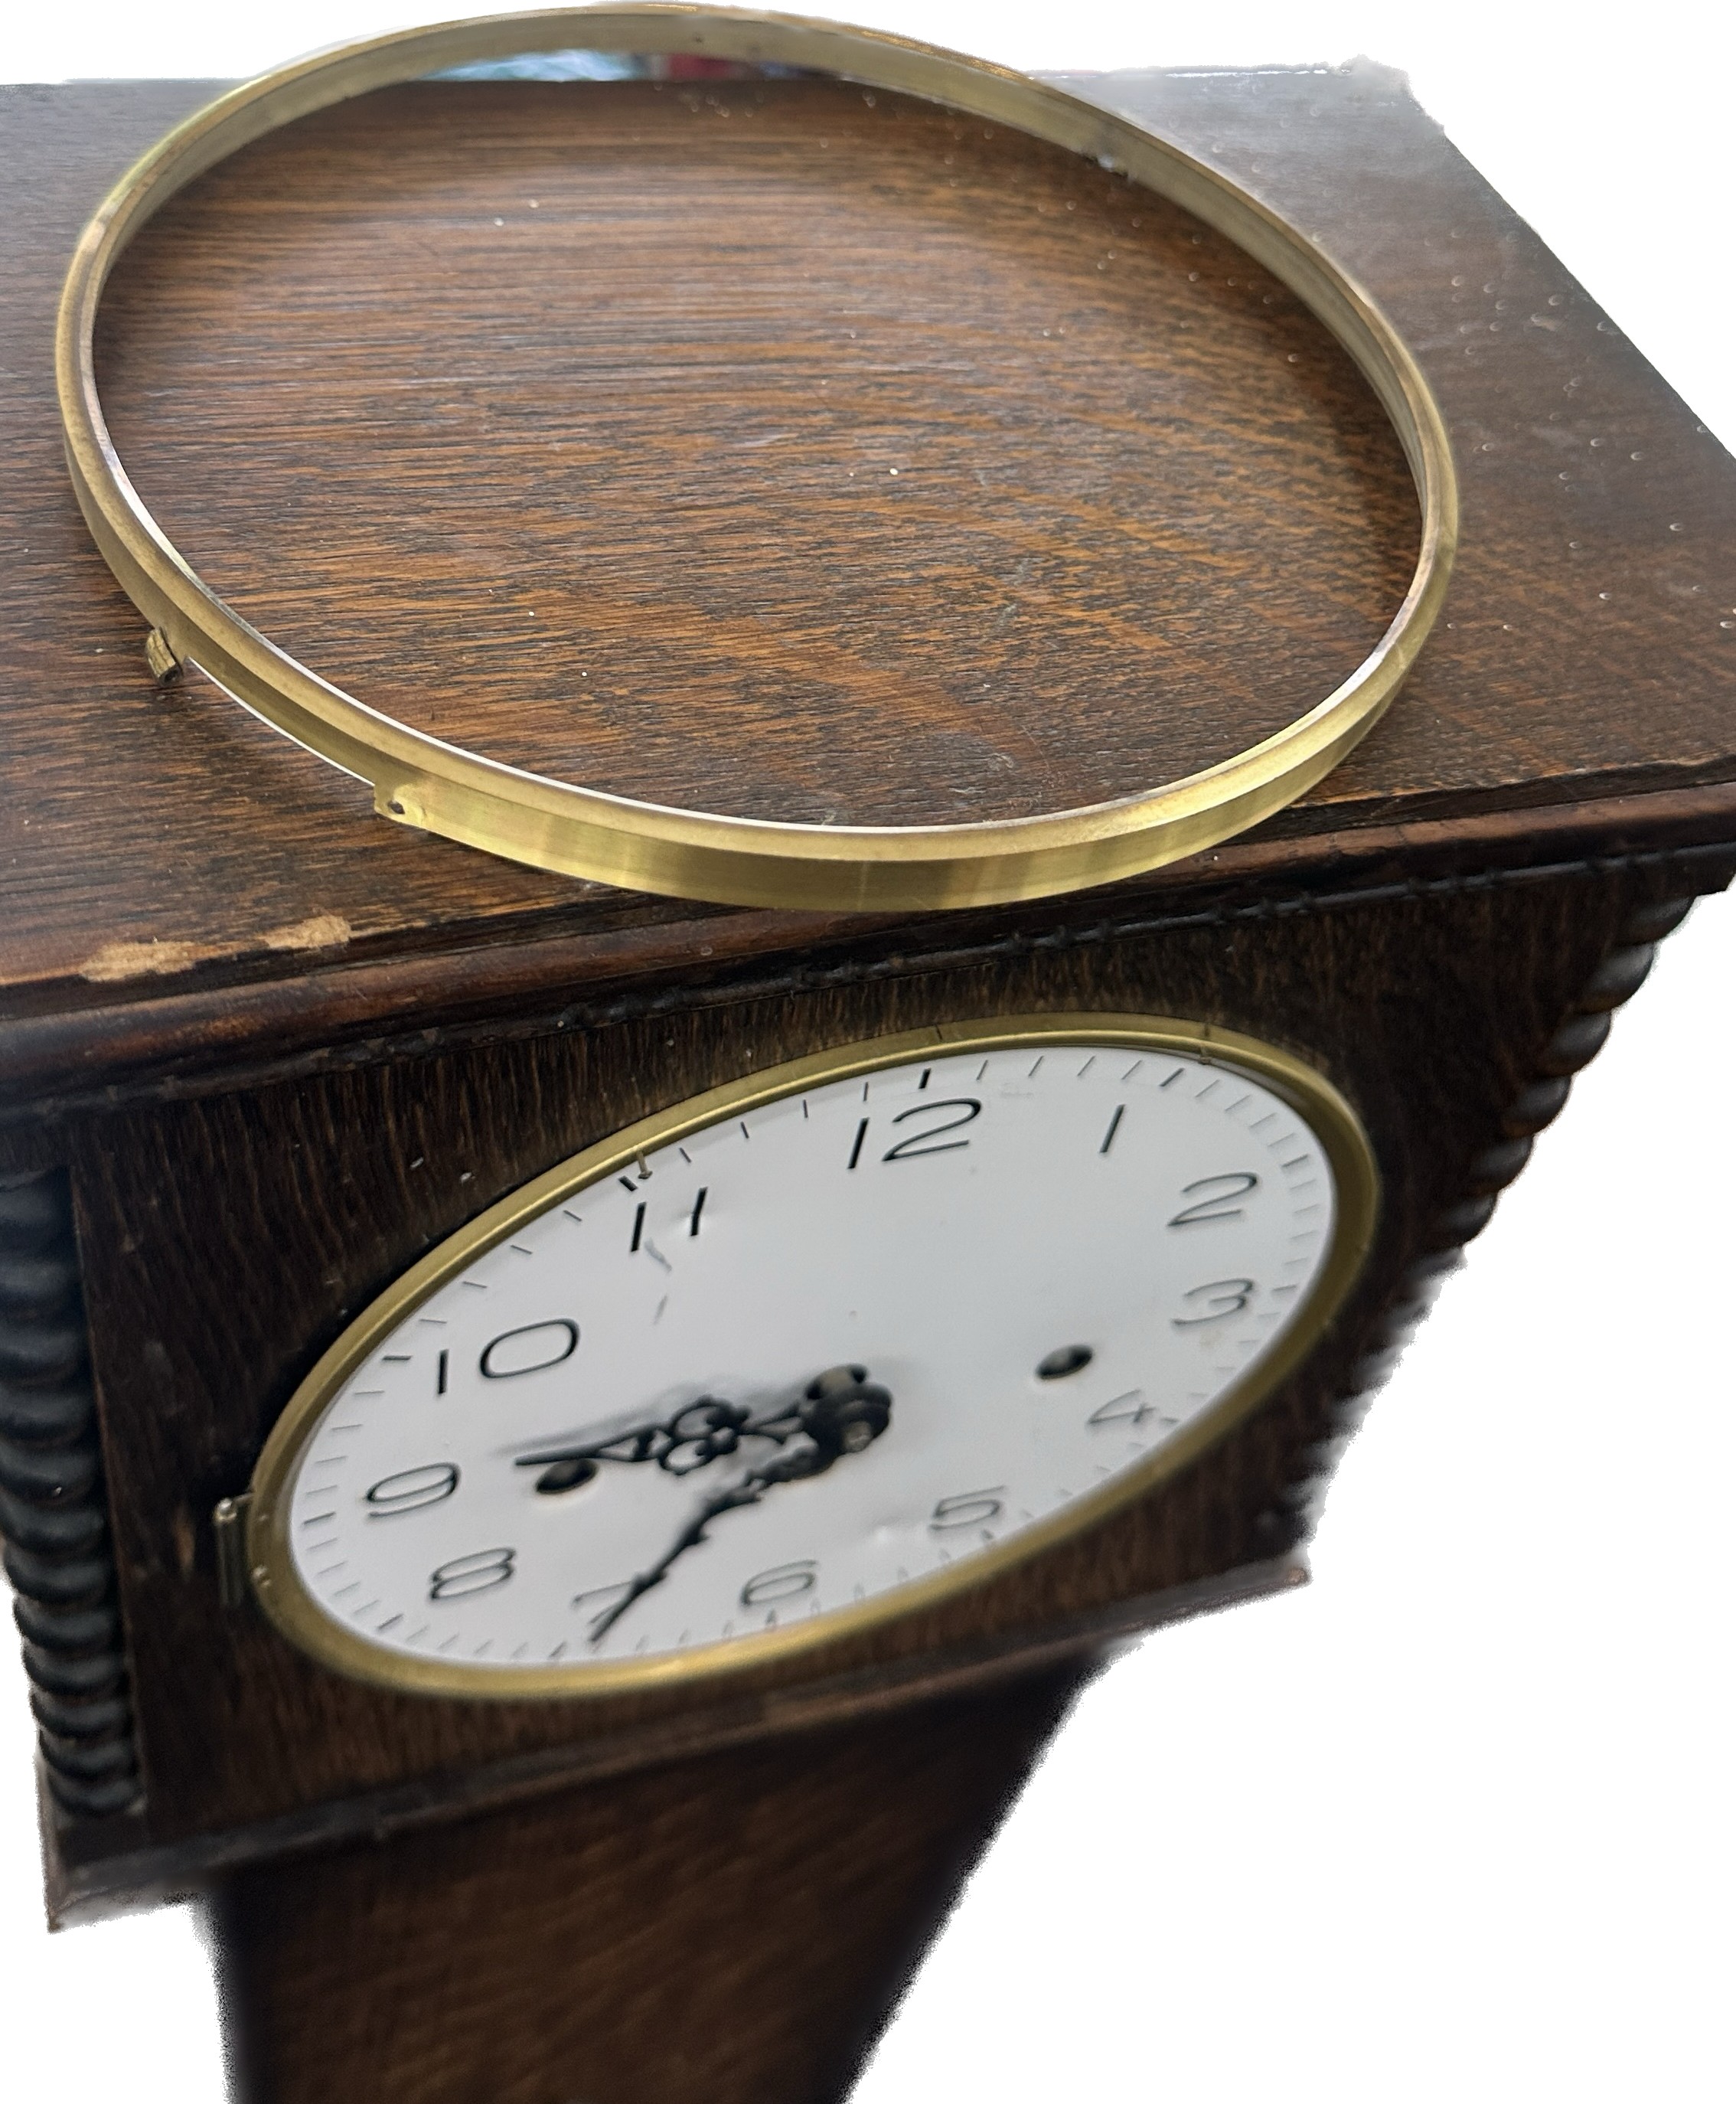 Oak grand daughter west minister chime three key hole clock missing glass overall height 52 inches - Image 3 of 4